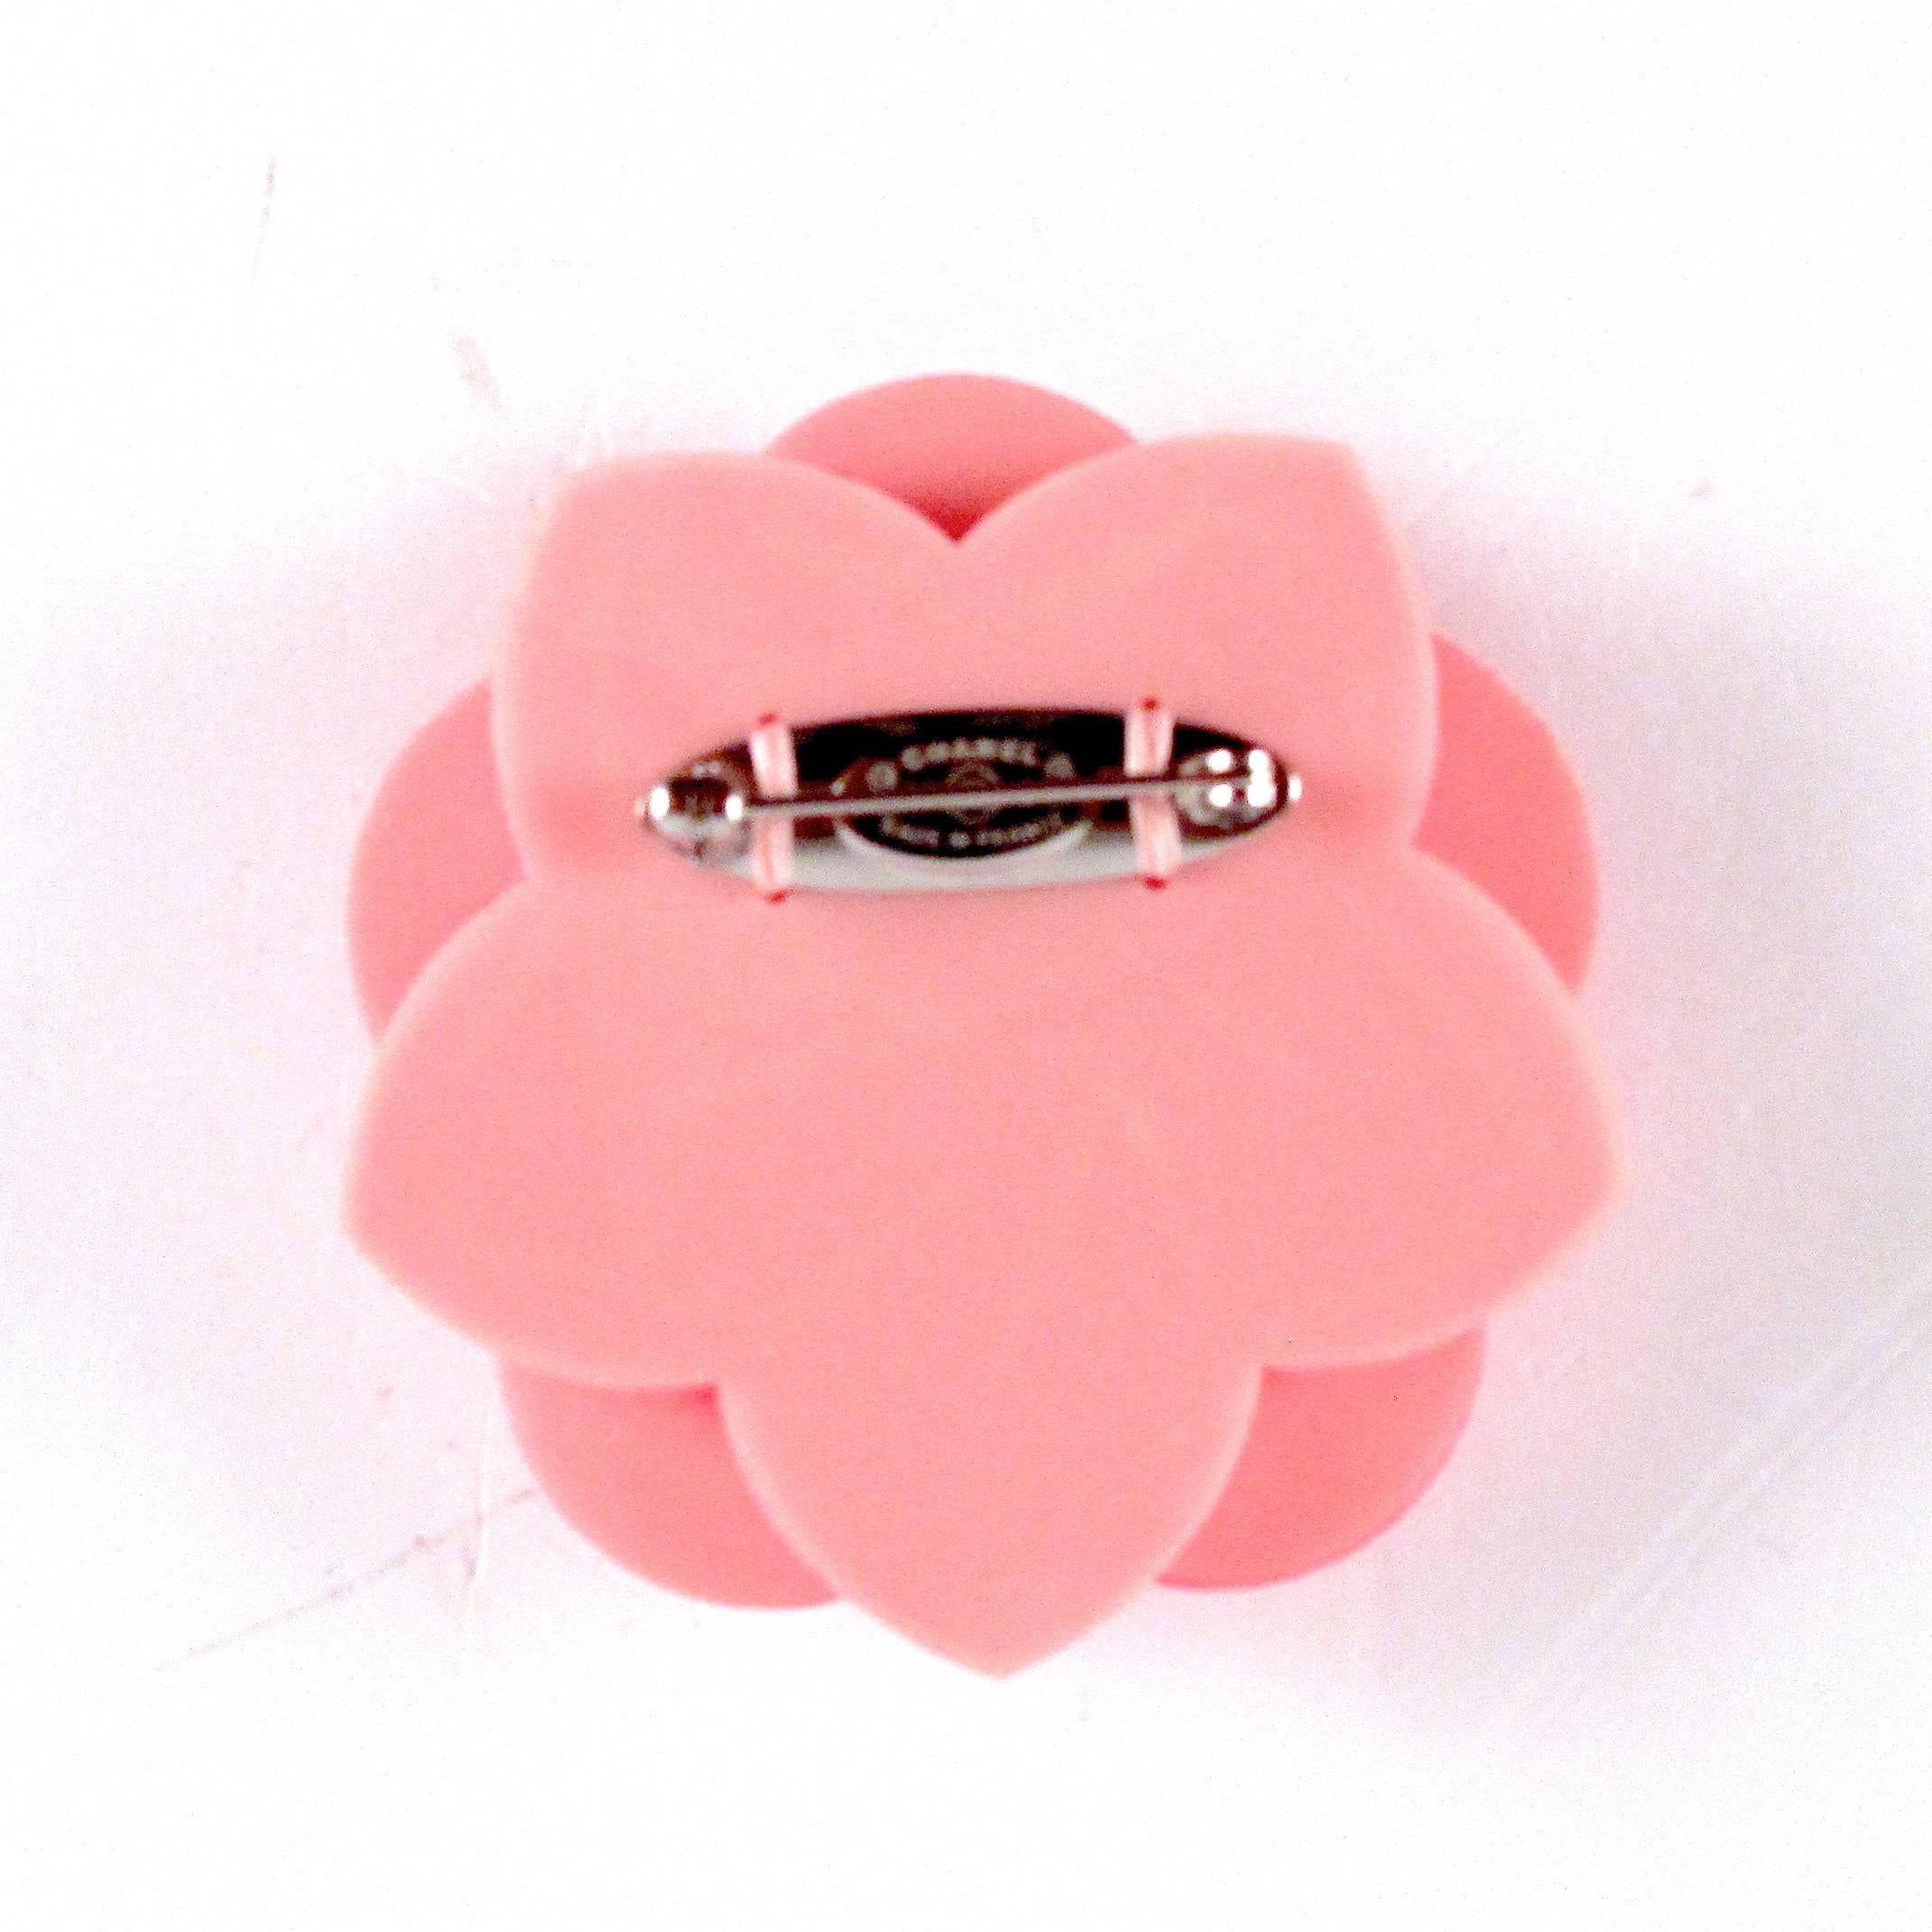 Women's or Men's Chanel Camellia Pearl Pin - New - 2016 - Pink Crystal Brooch Silver Charm CC 16C